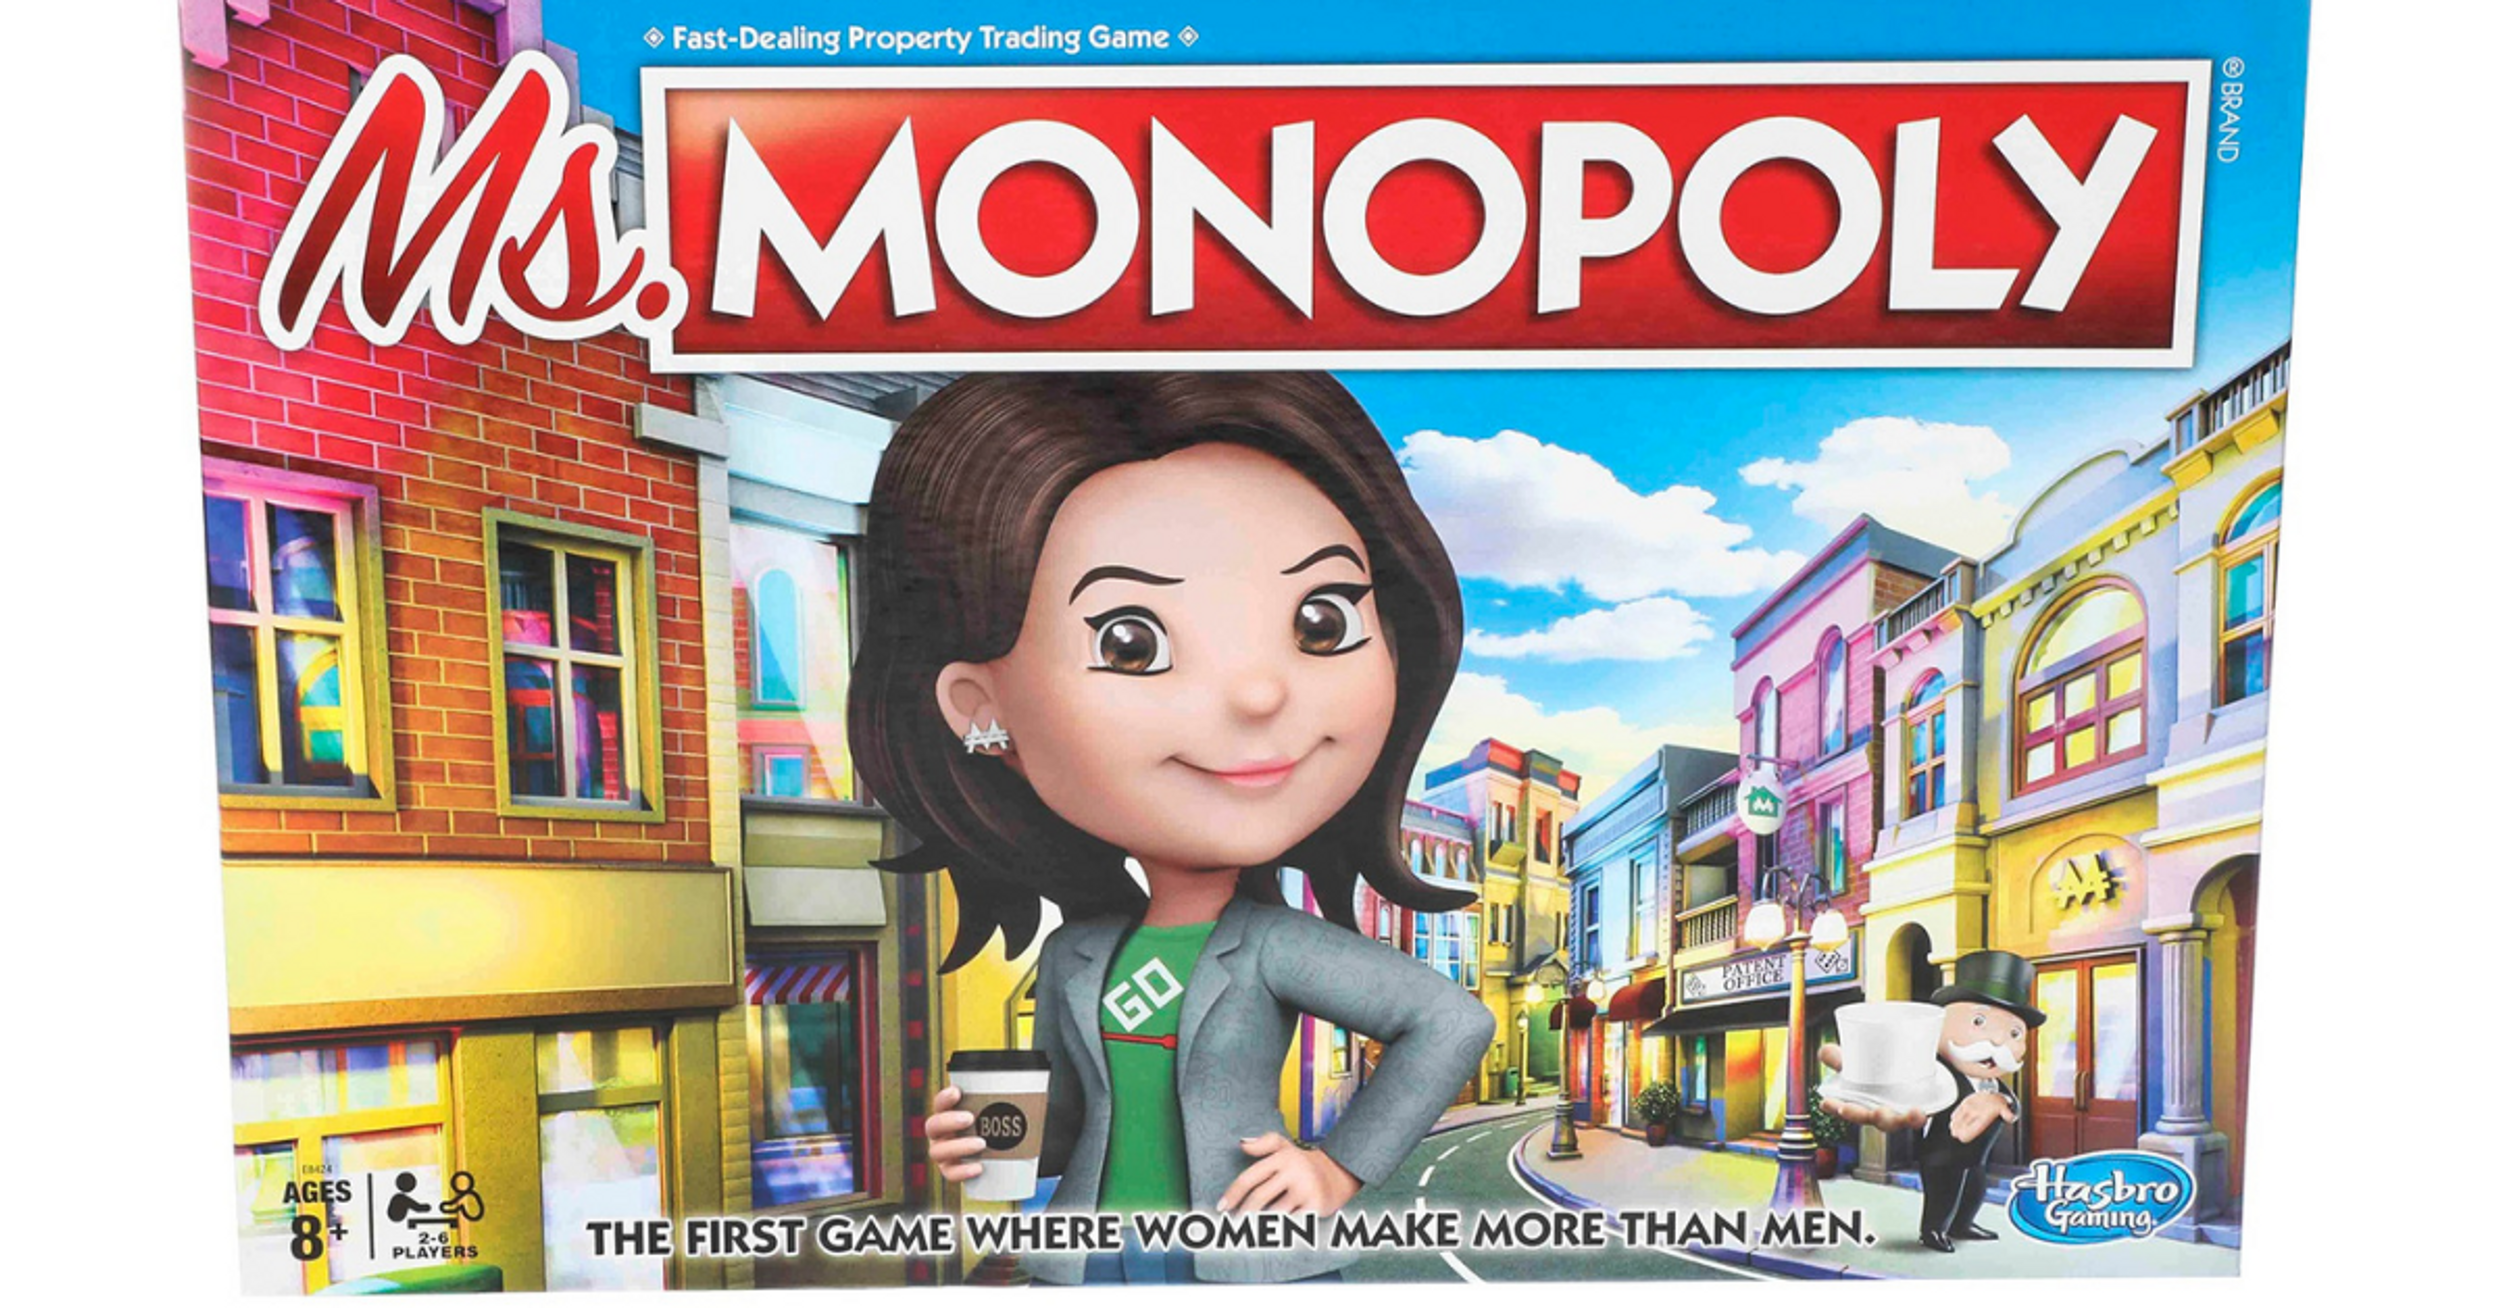 New 'Ms. Monopoly' Game Features Rules Where Women Make More Money Than Men